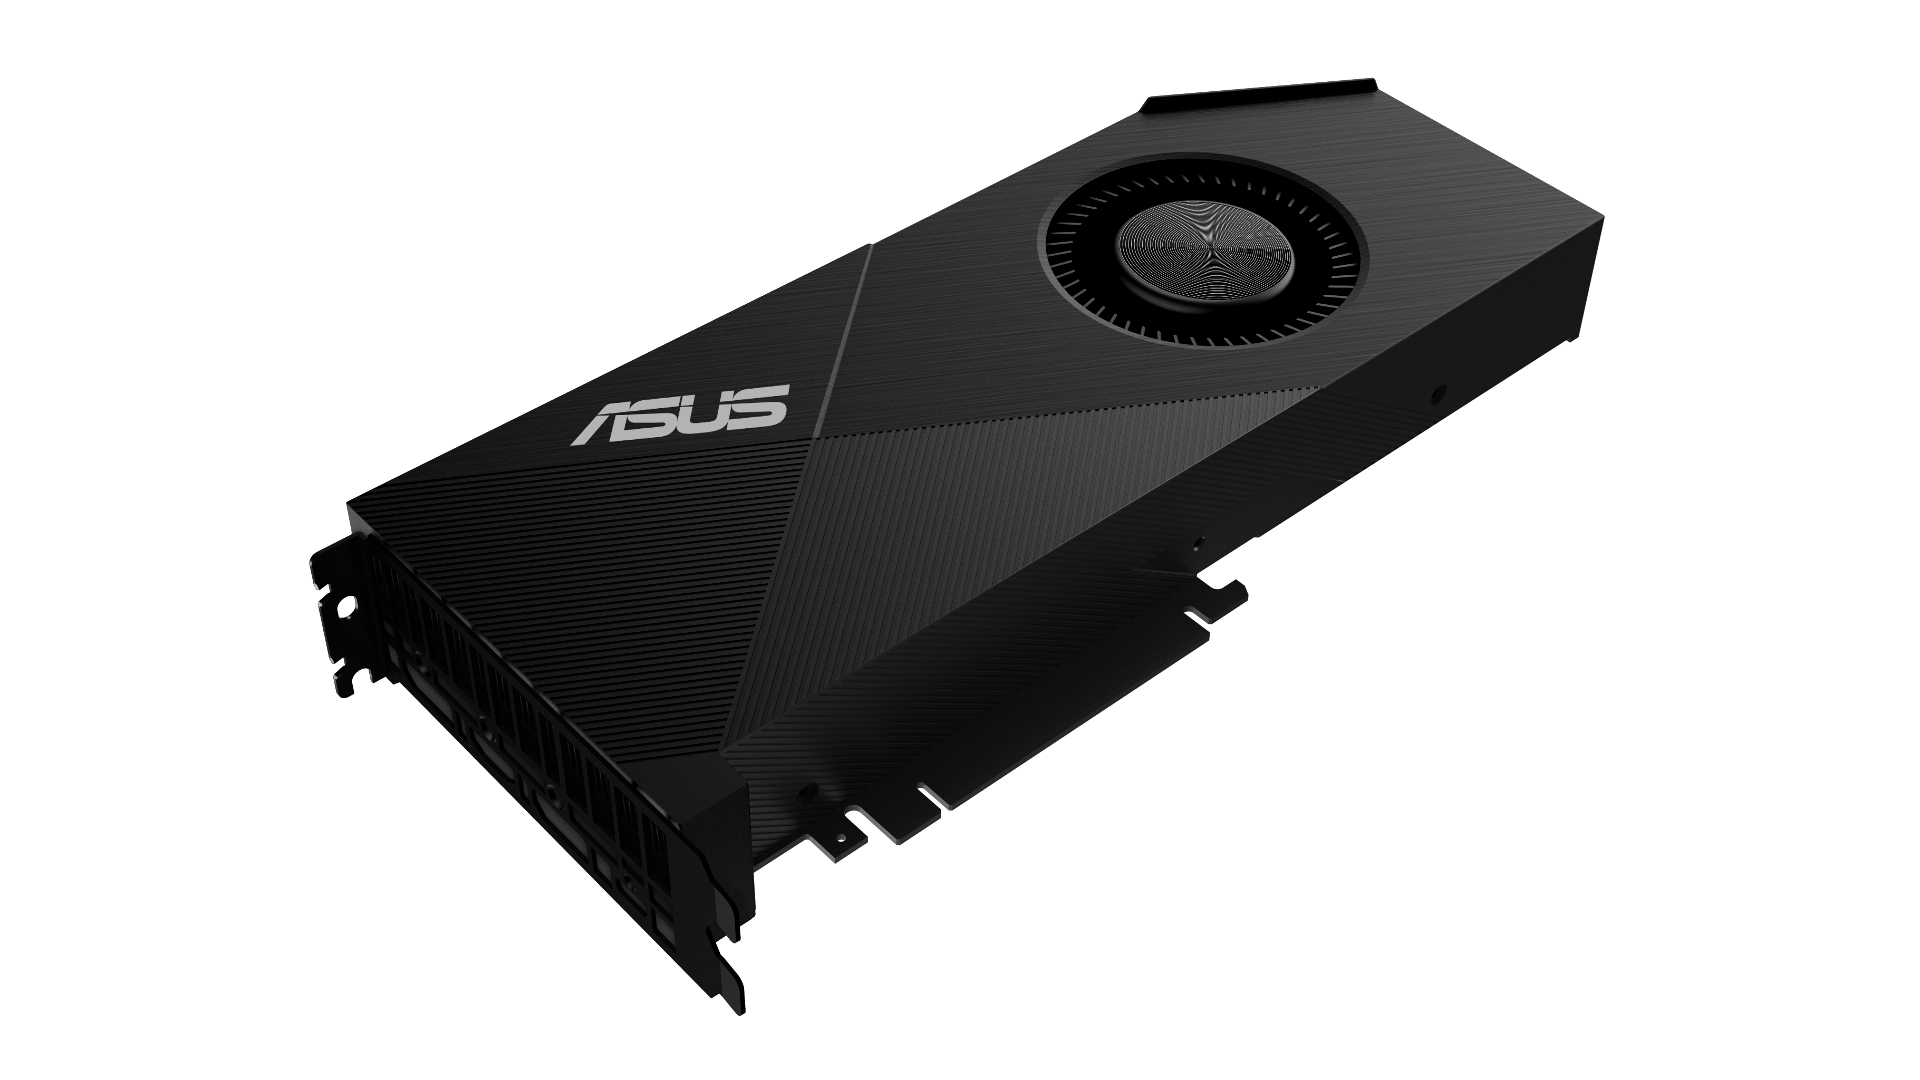 asus-geforce-rtx-2080-and-2080-ti-graphics-cards-are-available-for-pre